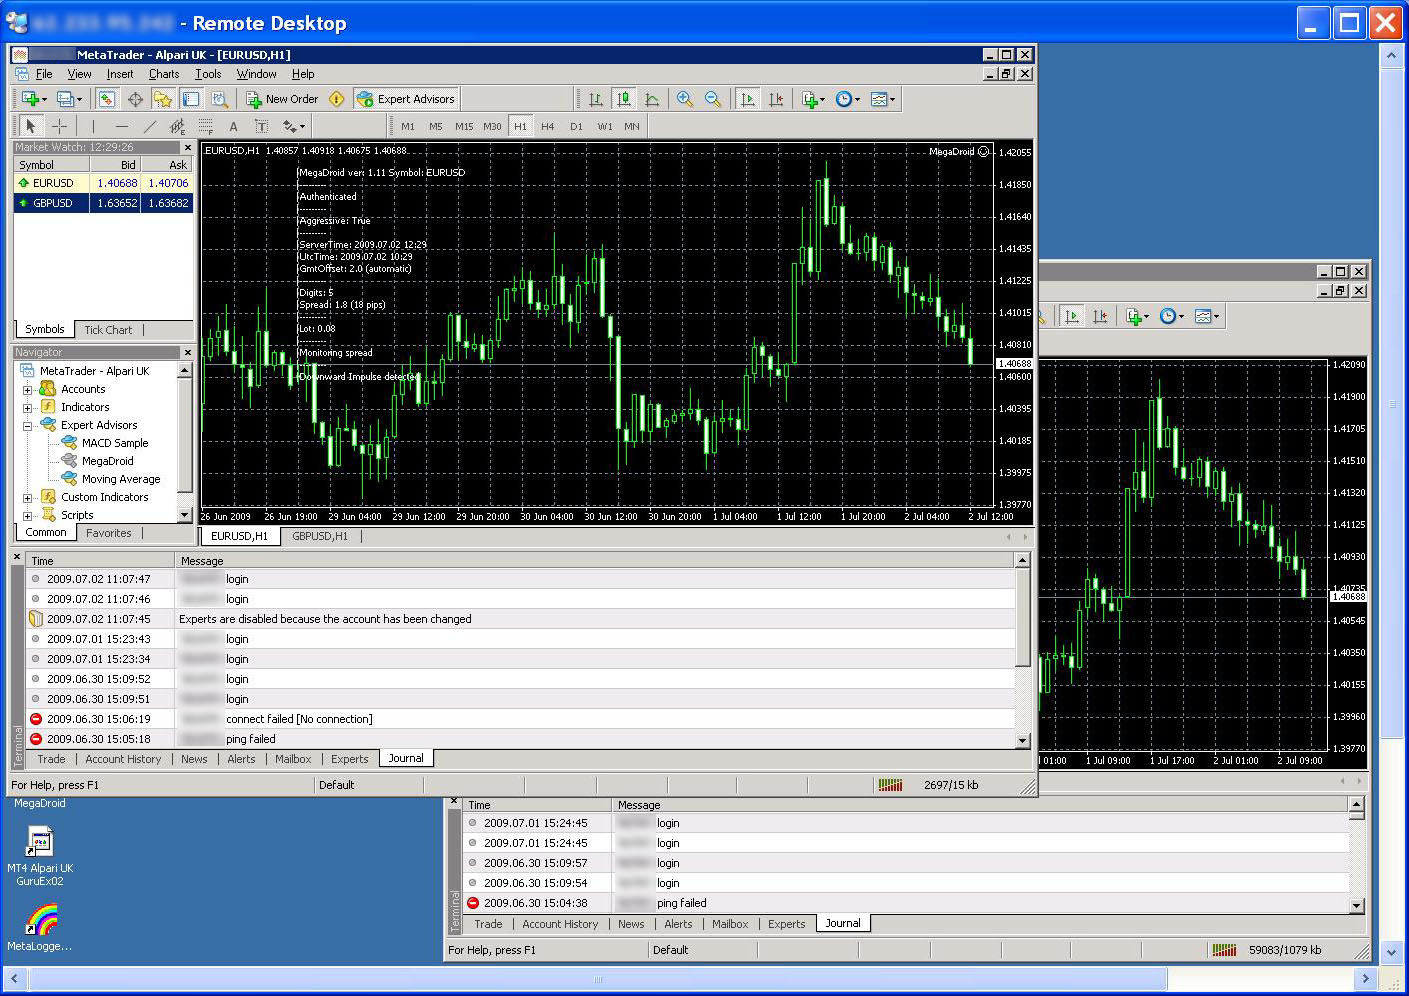 Forex MegaDroid bursts into life again!